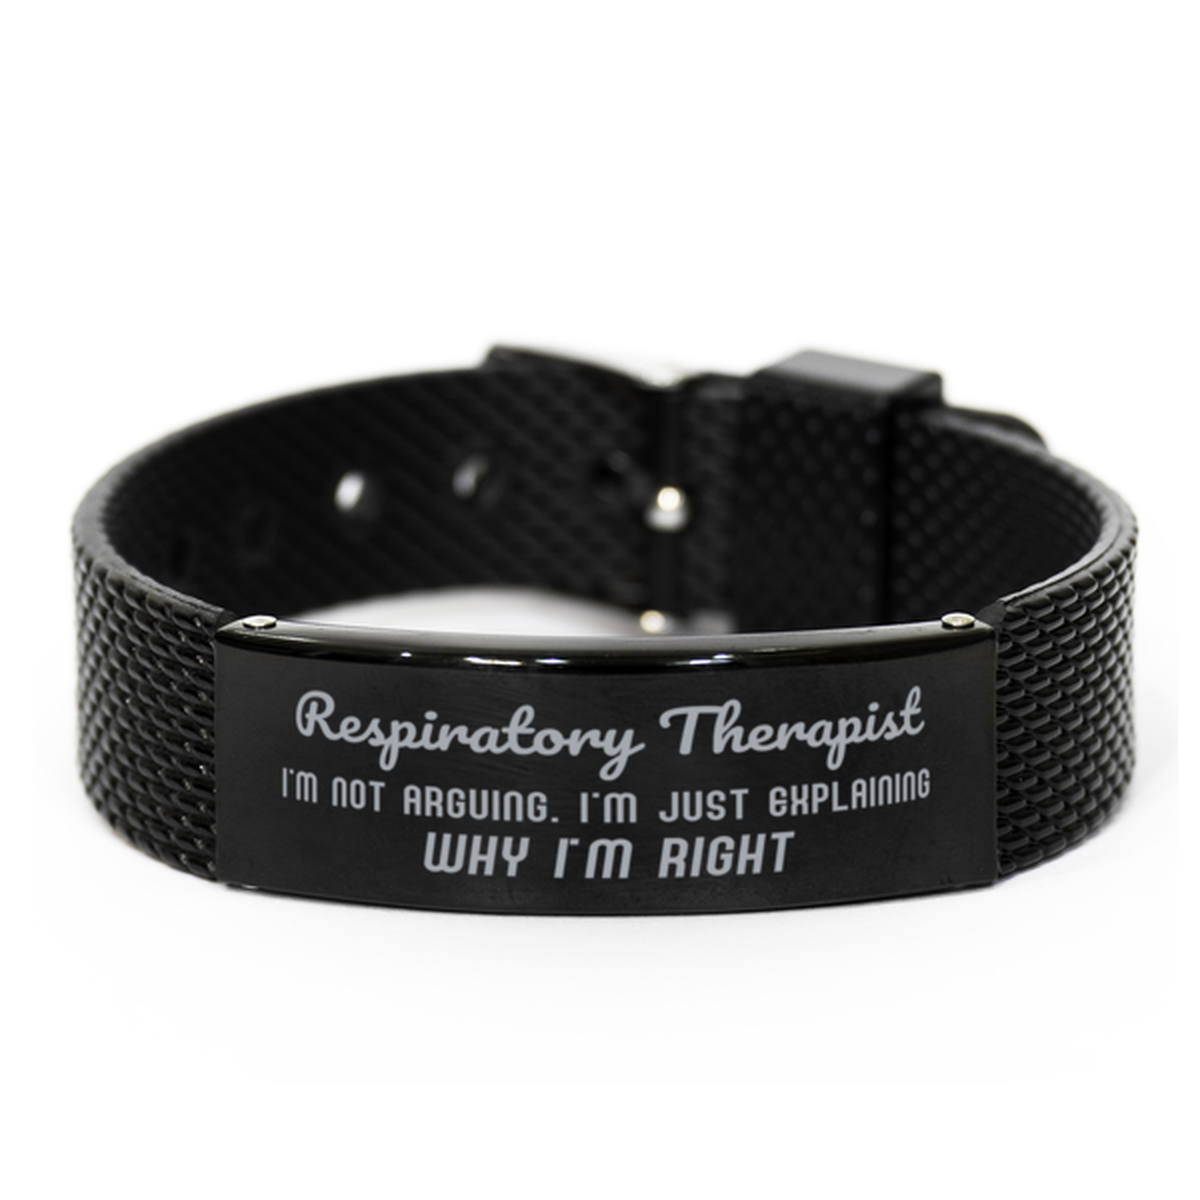 Respiratory Therapist I'm not Arguing. I'm Just Explaining Why I'm RIGHT Black Shark Mesh Bracelet, Funny Saying Quote Respiratory Therapist Gifts For Respiratory Therapist Graduation Birthday Christmas Gifts for Men Women Coworker